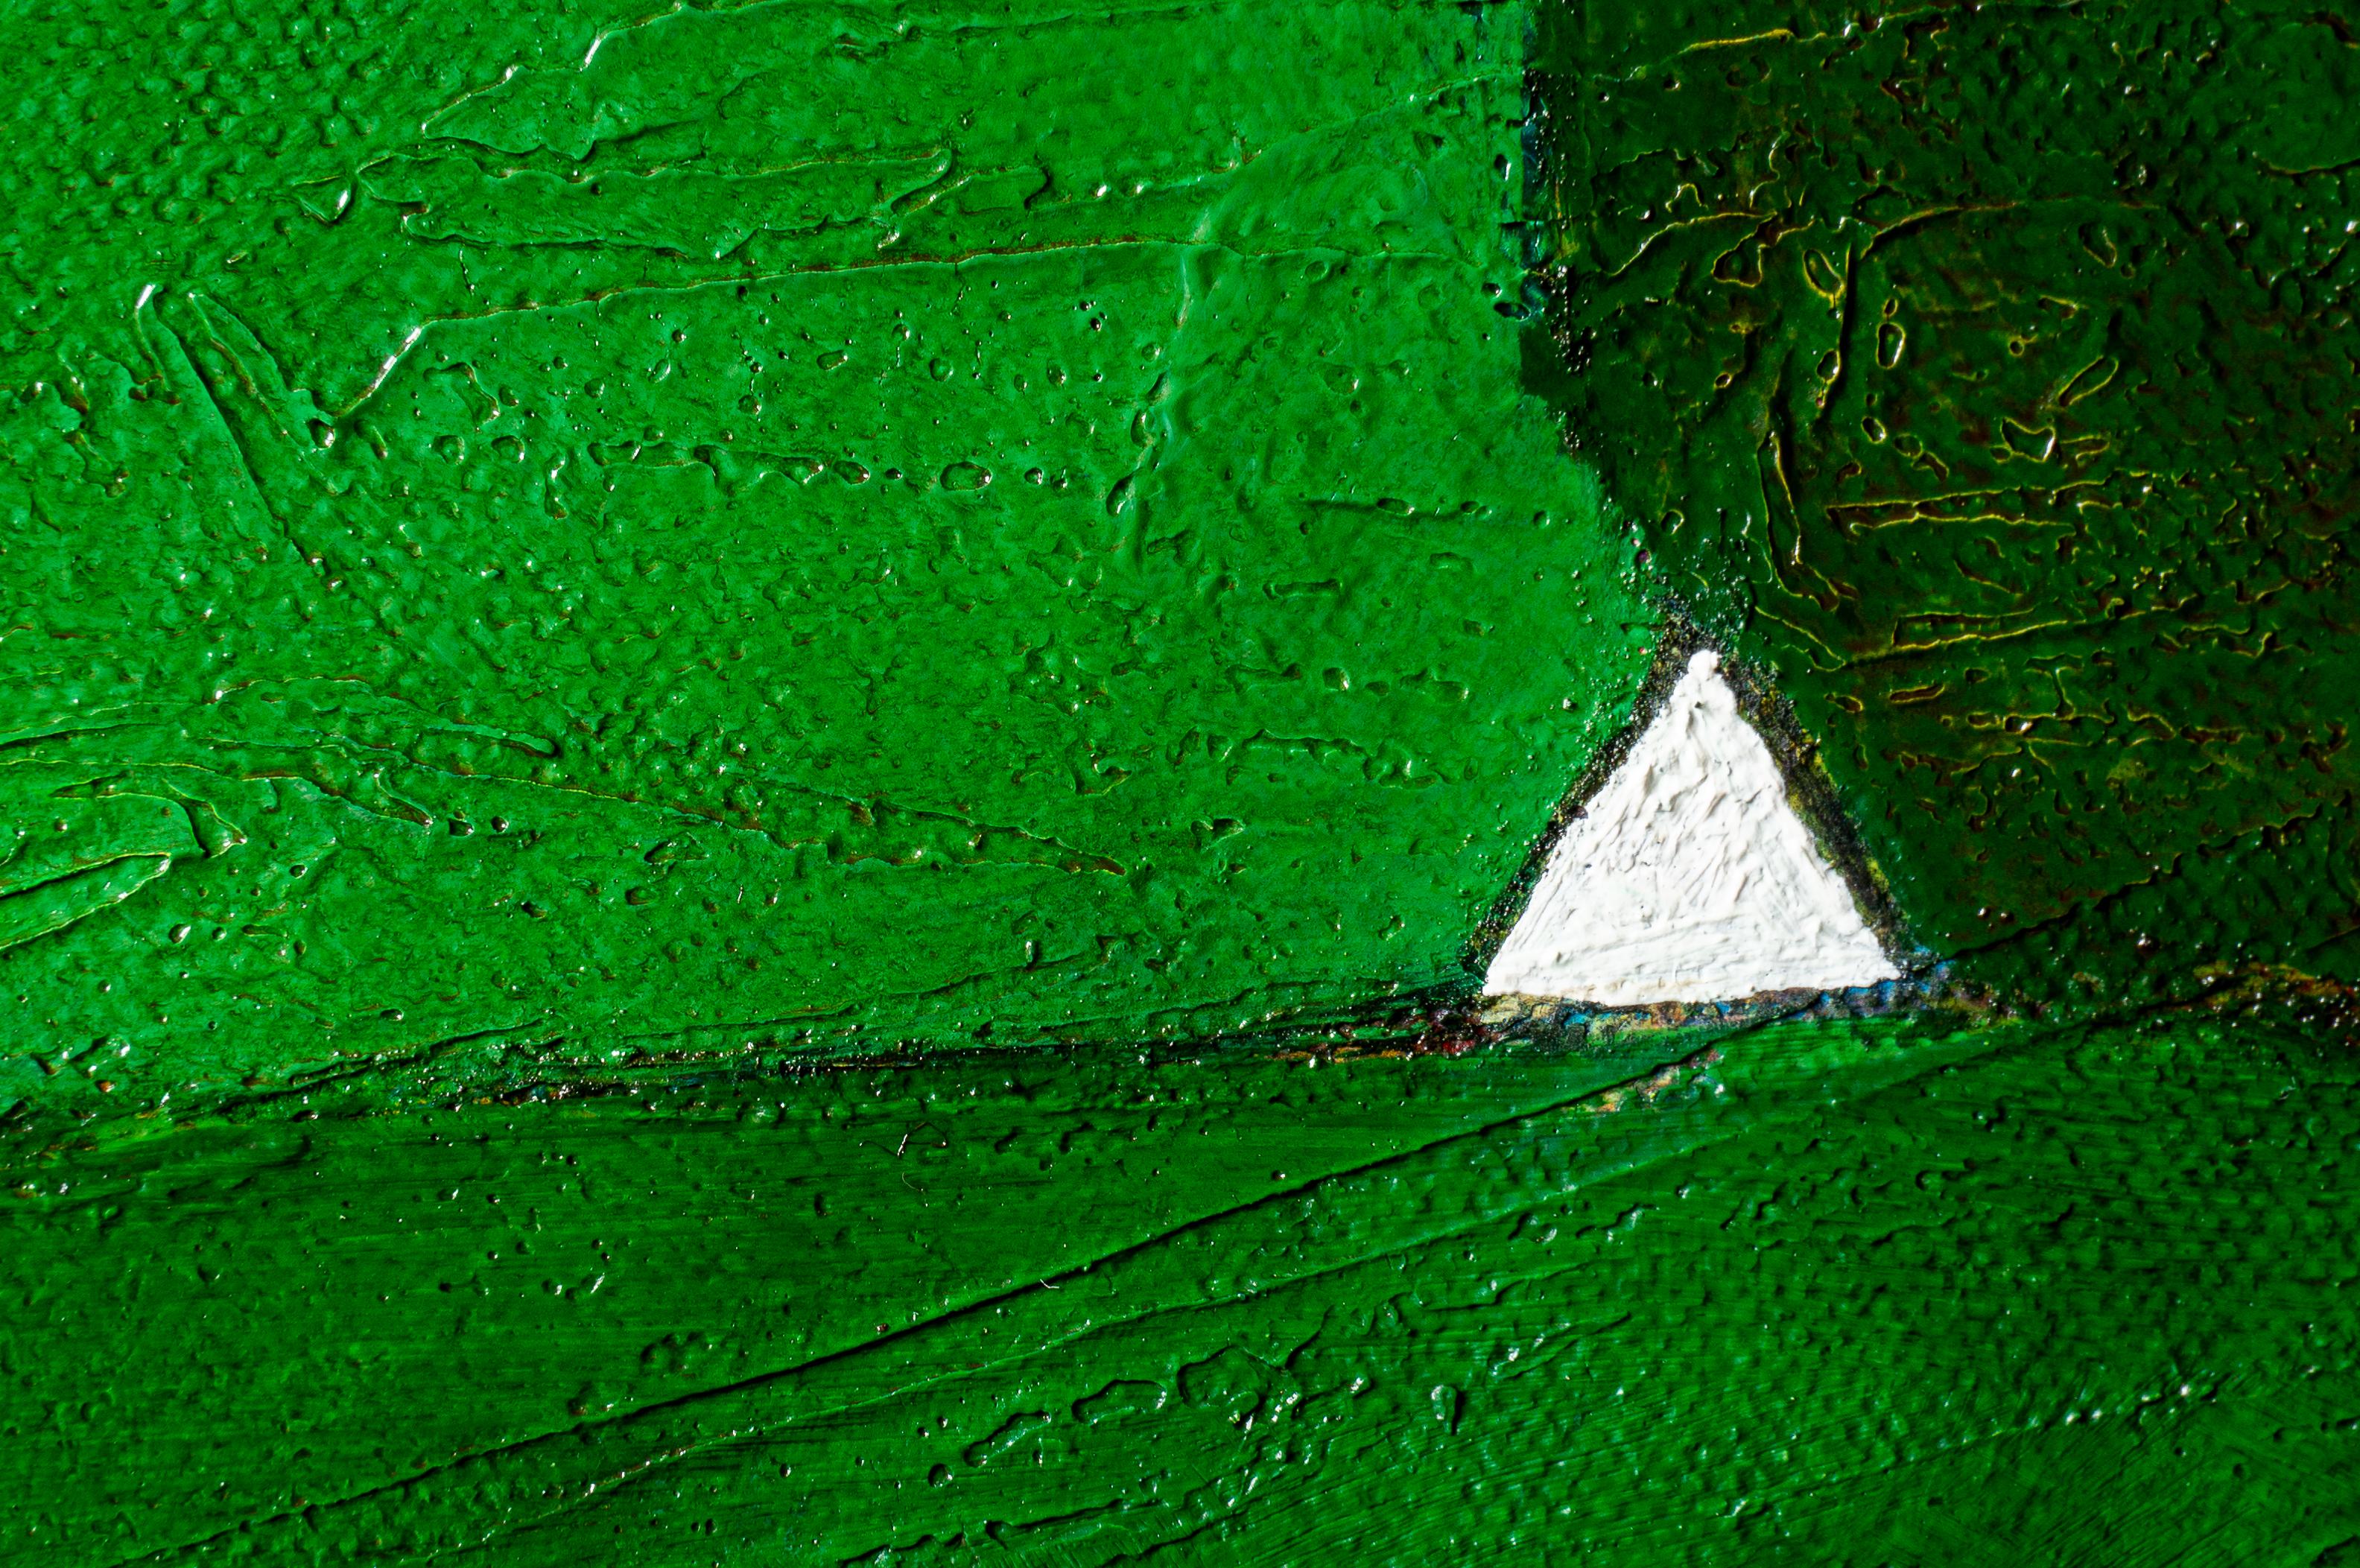 Green study - Painting by Luis Alexander Rodríguez (Ie-Xiua)